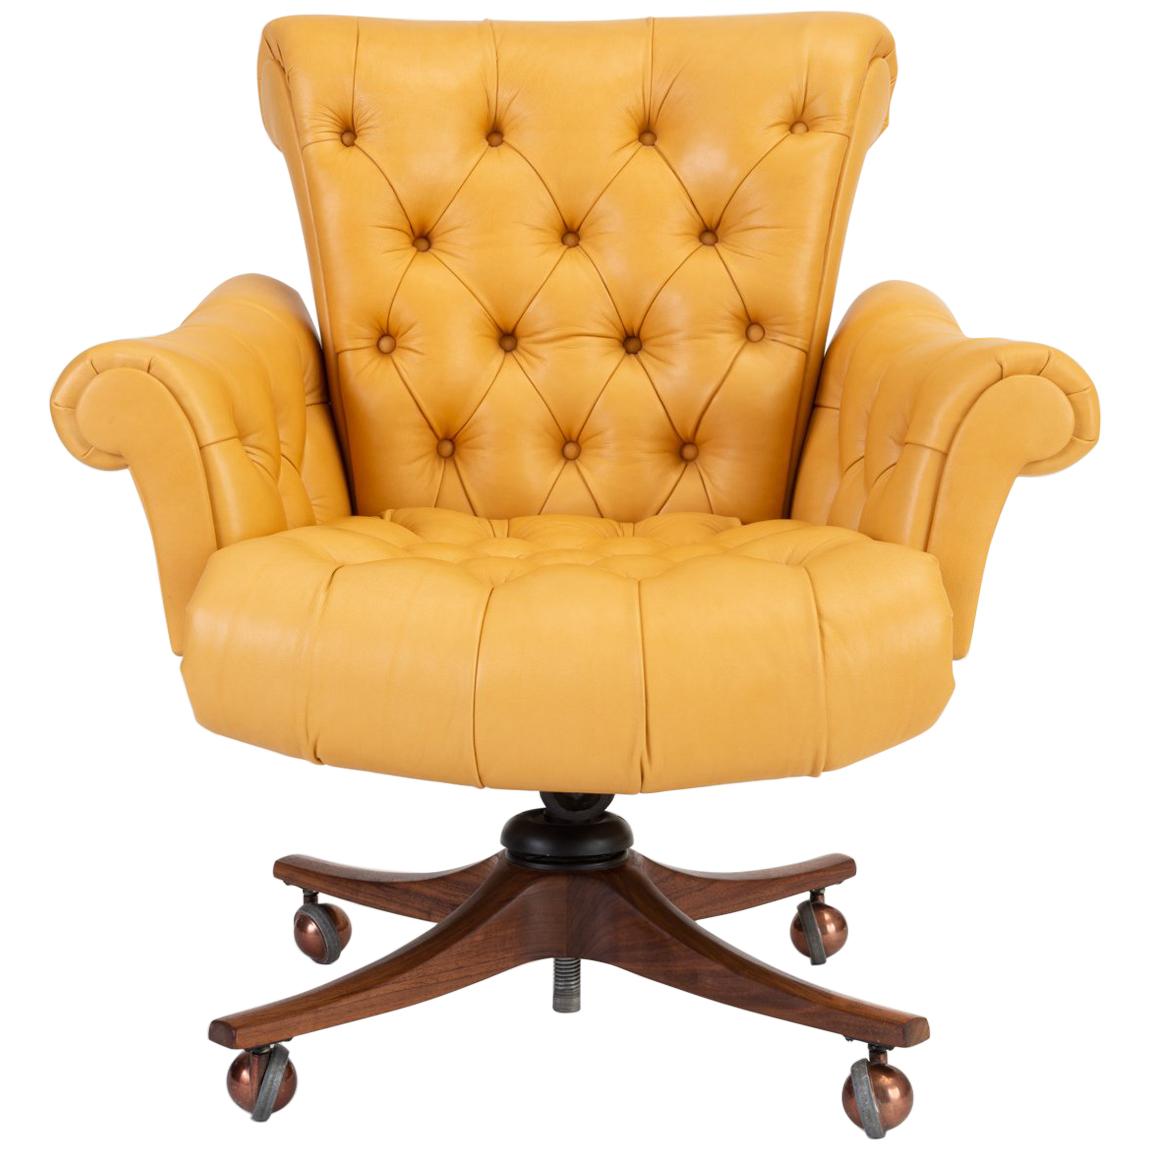 Model 932 “In Clover” Executive Office Chair by Edward Wormley for Dunbar